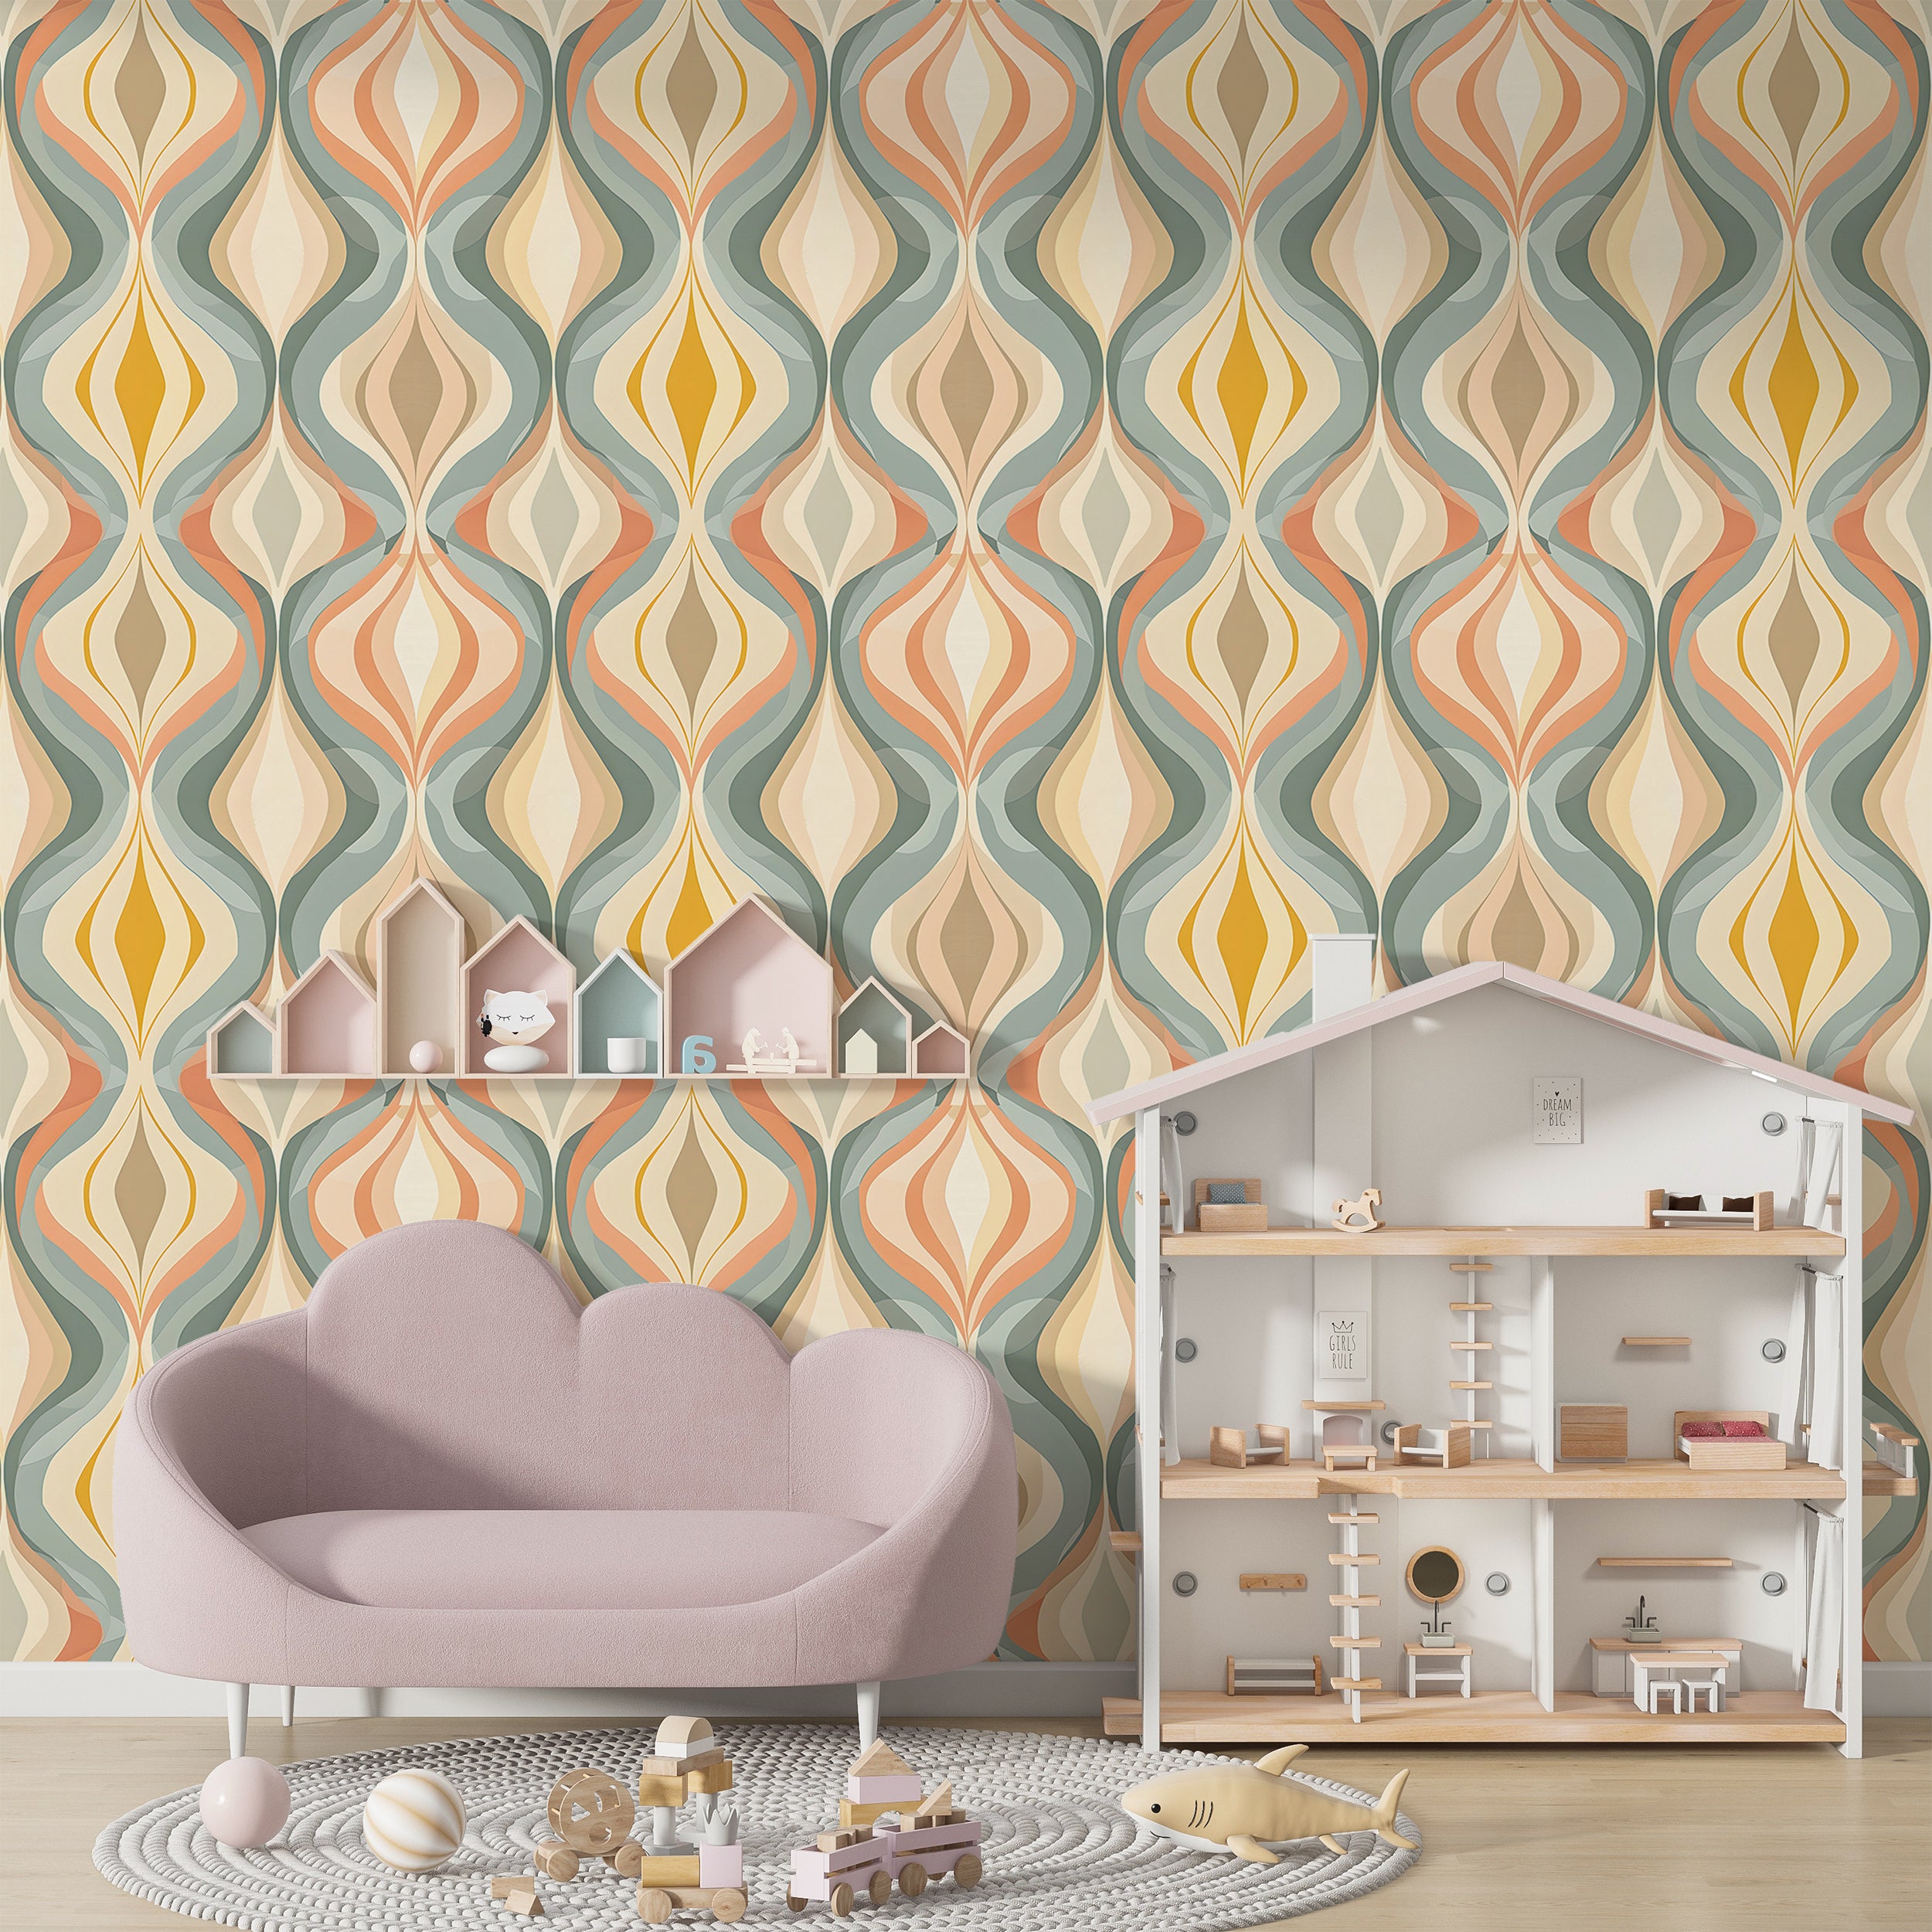 Abstract Wavy Pattern Wallpaper in Pastel Colors, Peel and Stick Geometrical Wallpaper, Removable PVC free Nursery Wall Decal